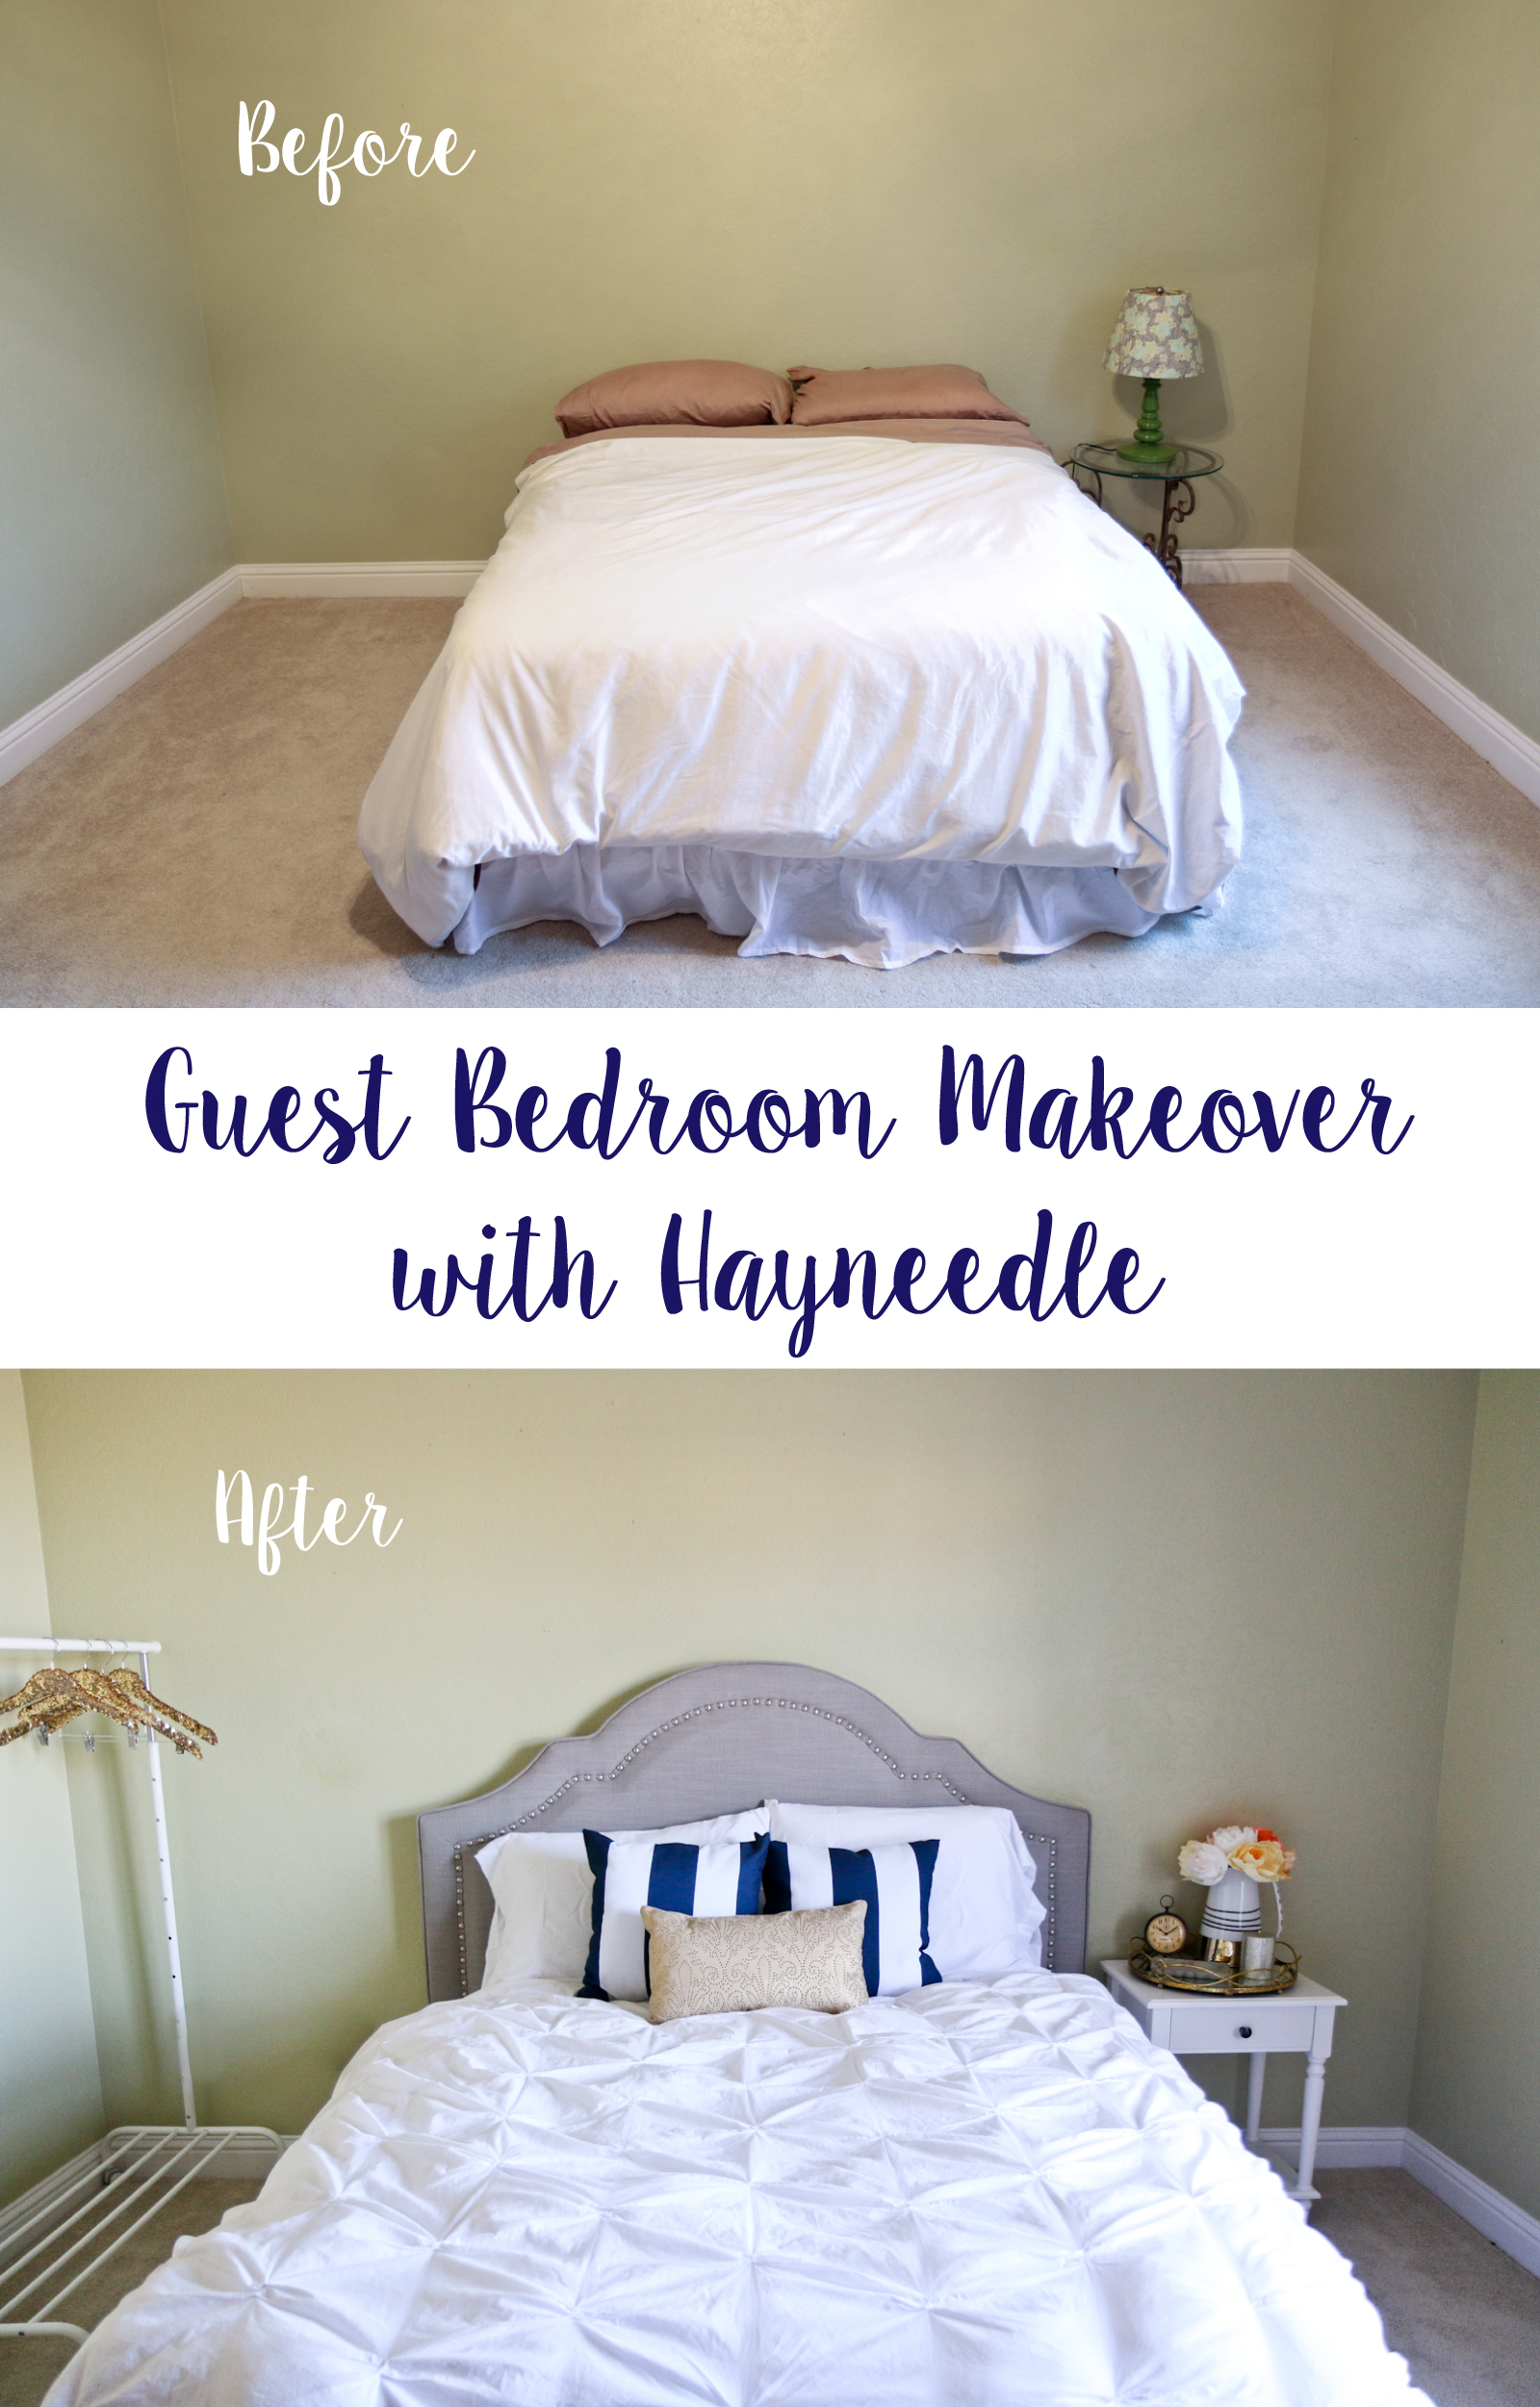 Guest Bedroom Makeover with Hayneedle